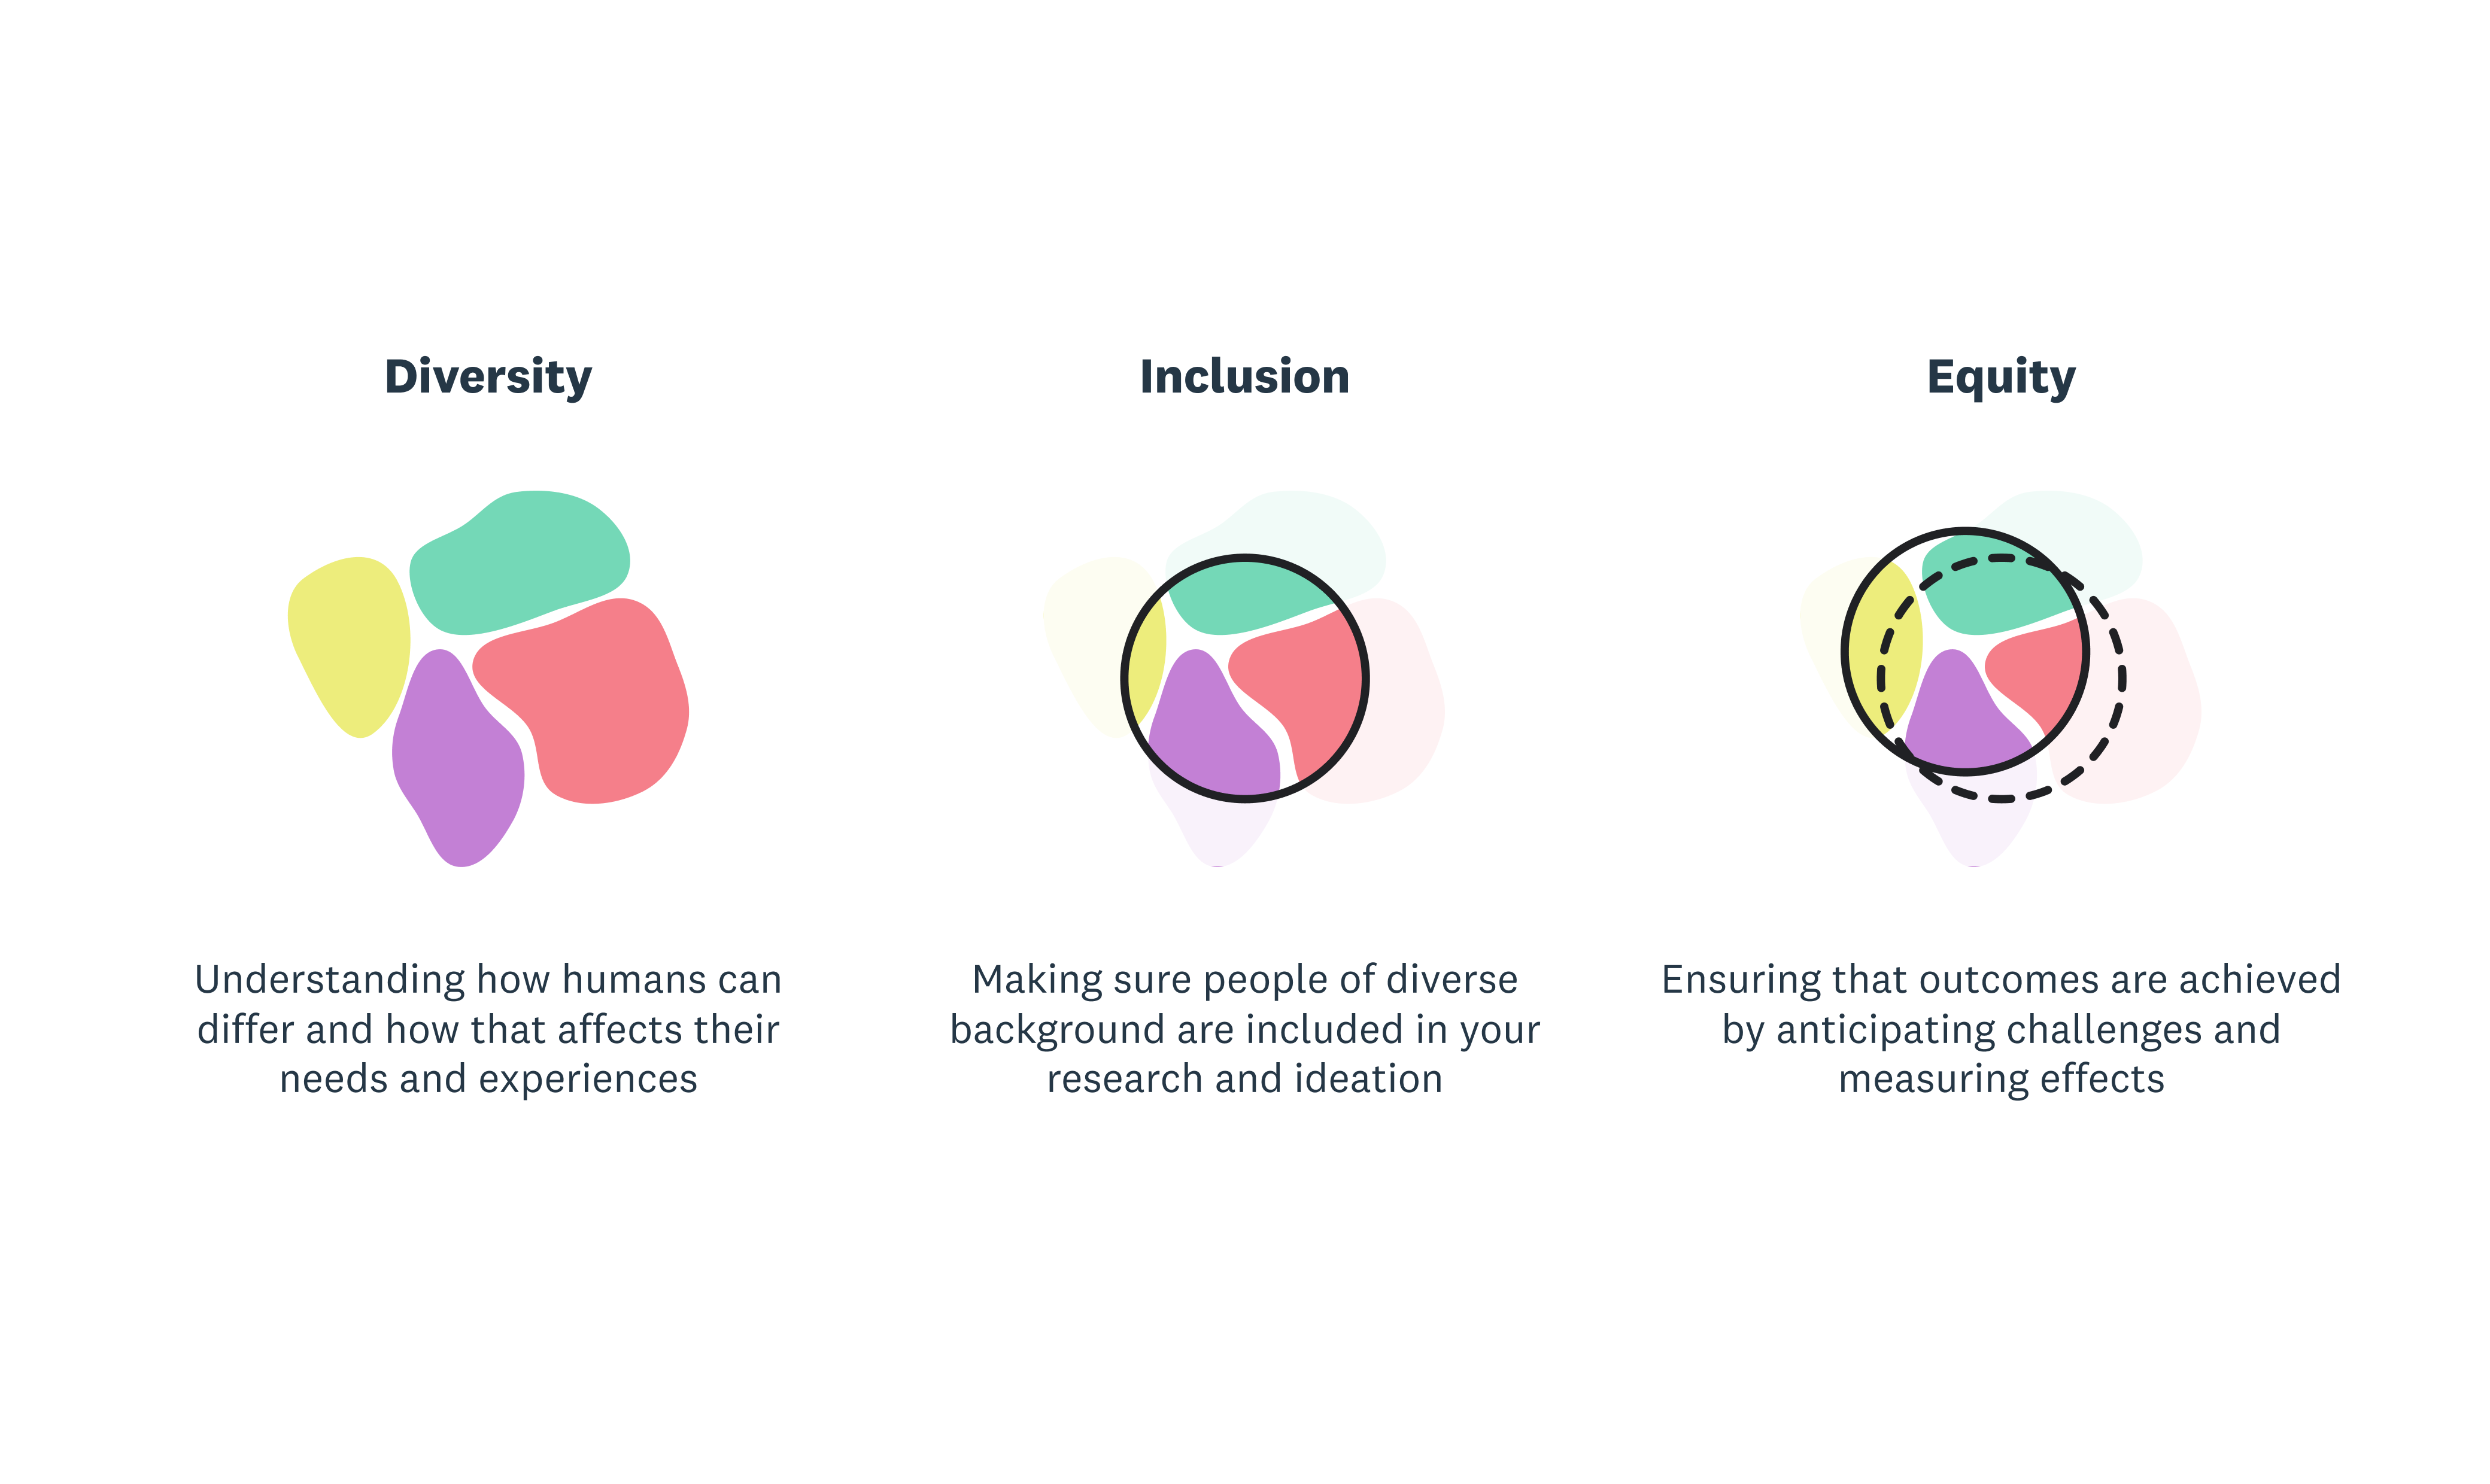 Diversity: Understanding how humans can differ and how that affets their needs and experiences; Inclusion: Making sure people of diverse background are included in your research and ideation; Equity: Ensuring that outcomes are acheived by anticipating challenges and measuring effects.  